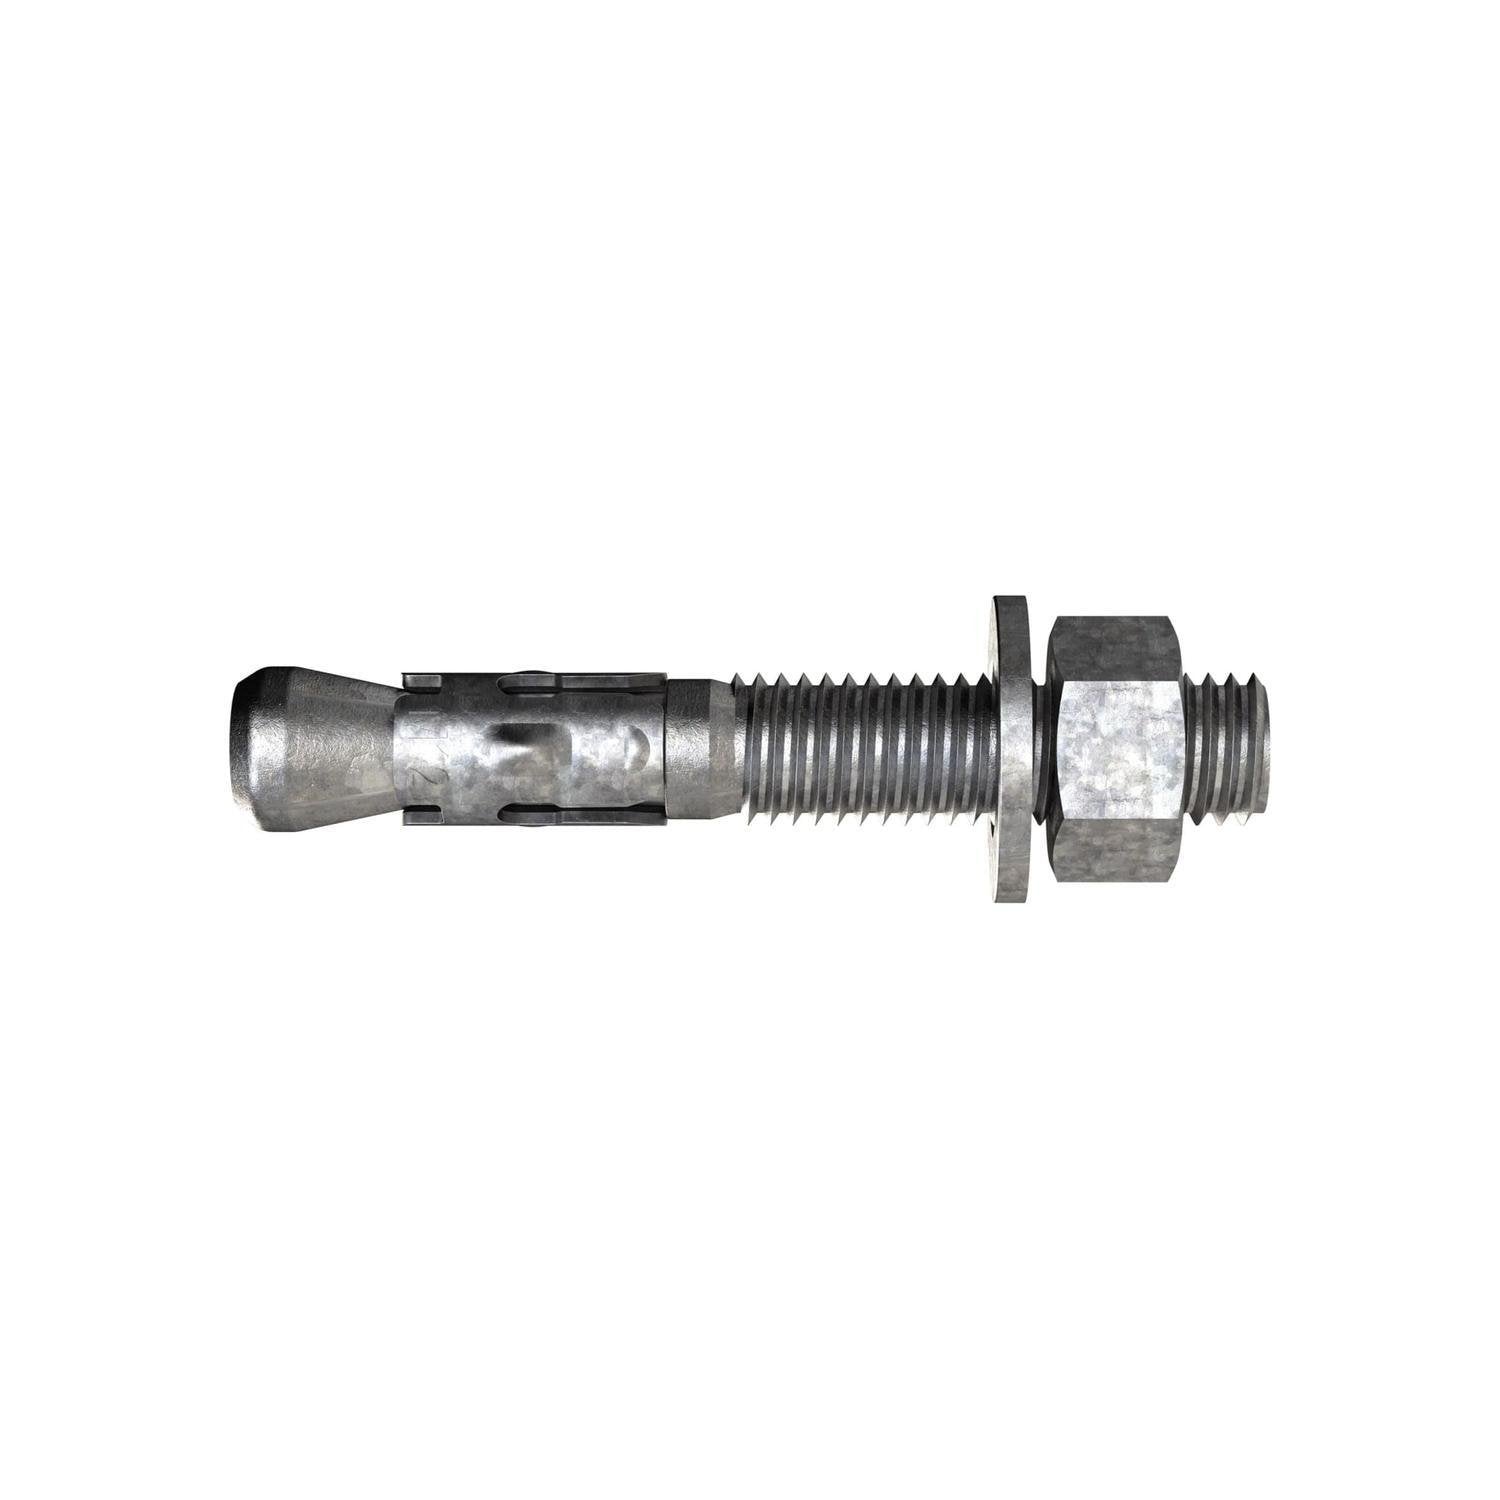 Bremick Through Bolts 12 x 140mm Galvanised (100 Pack)